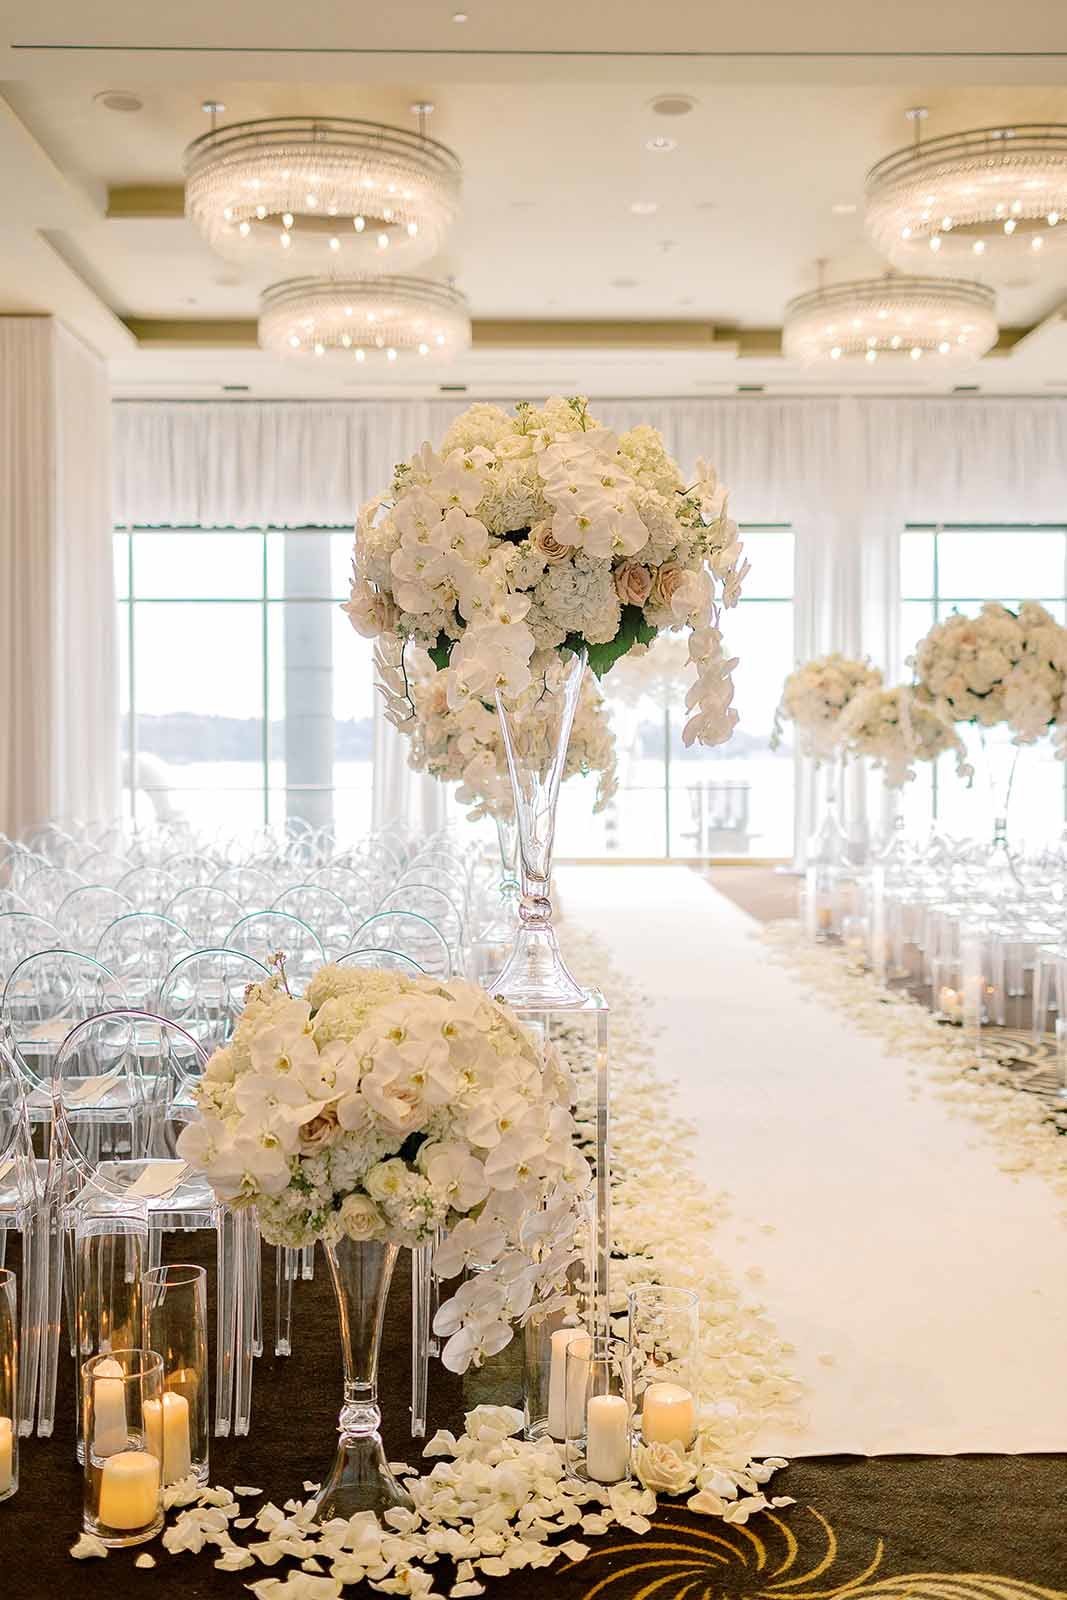 grand wedding ceremony aisle with white flower arrangements on clear lucite pedestals, white rose petals, and hurricane candles lining the aisle